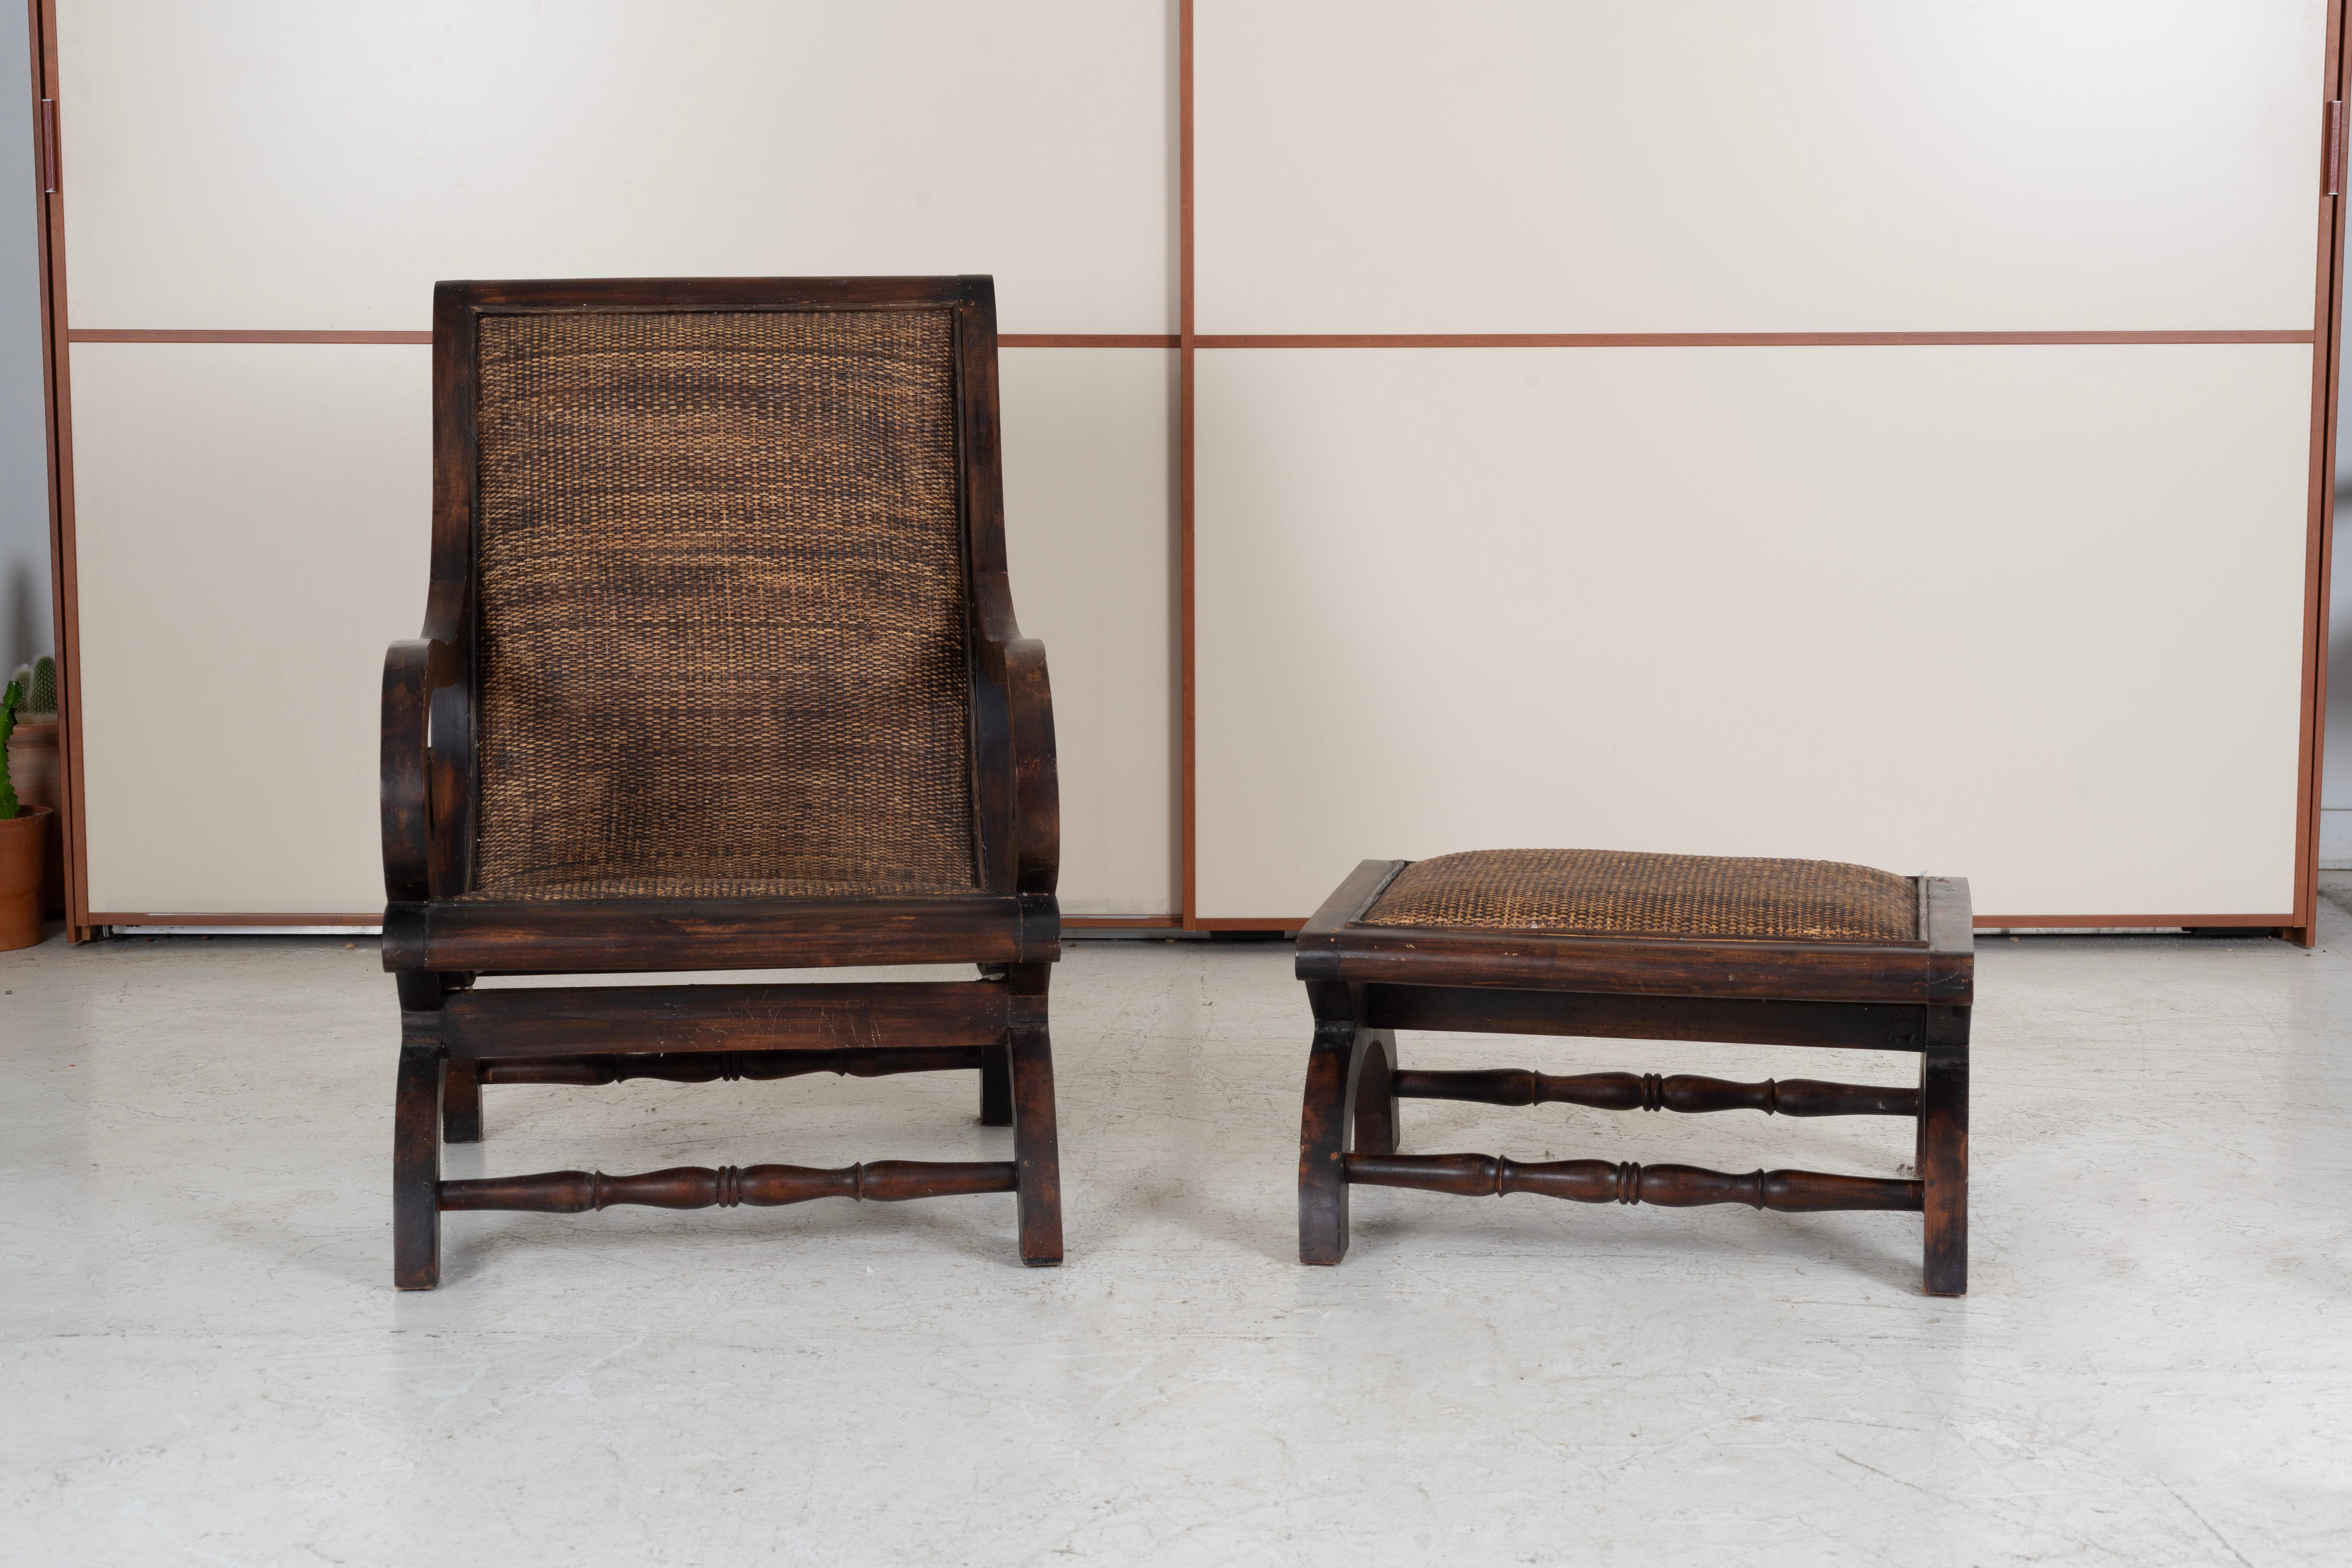 Anglo-Indian plantation lounge chair and ottoman, made in the Grand British Colonial style. The chairs features large scrolled arms with caned seat and ottoman. The chairs have a desirable weathered patina on the finish.

Ottoman Dimensions
H: